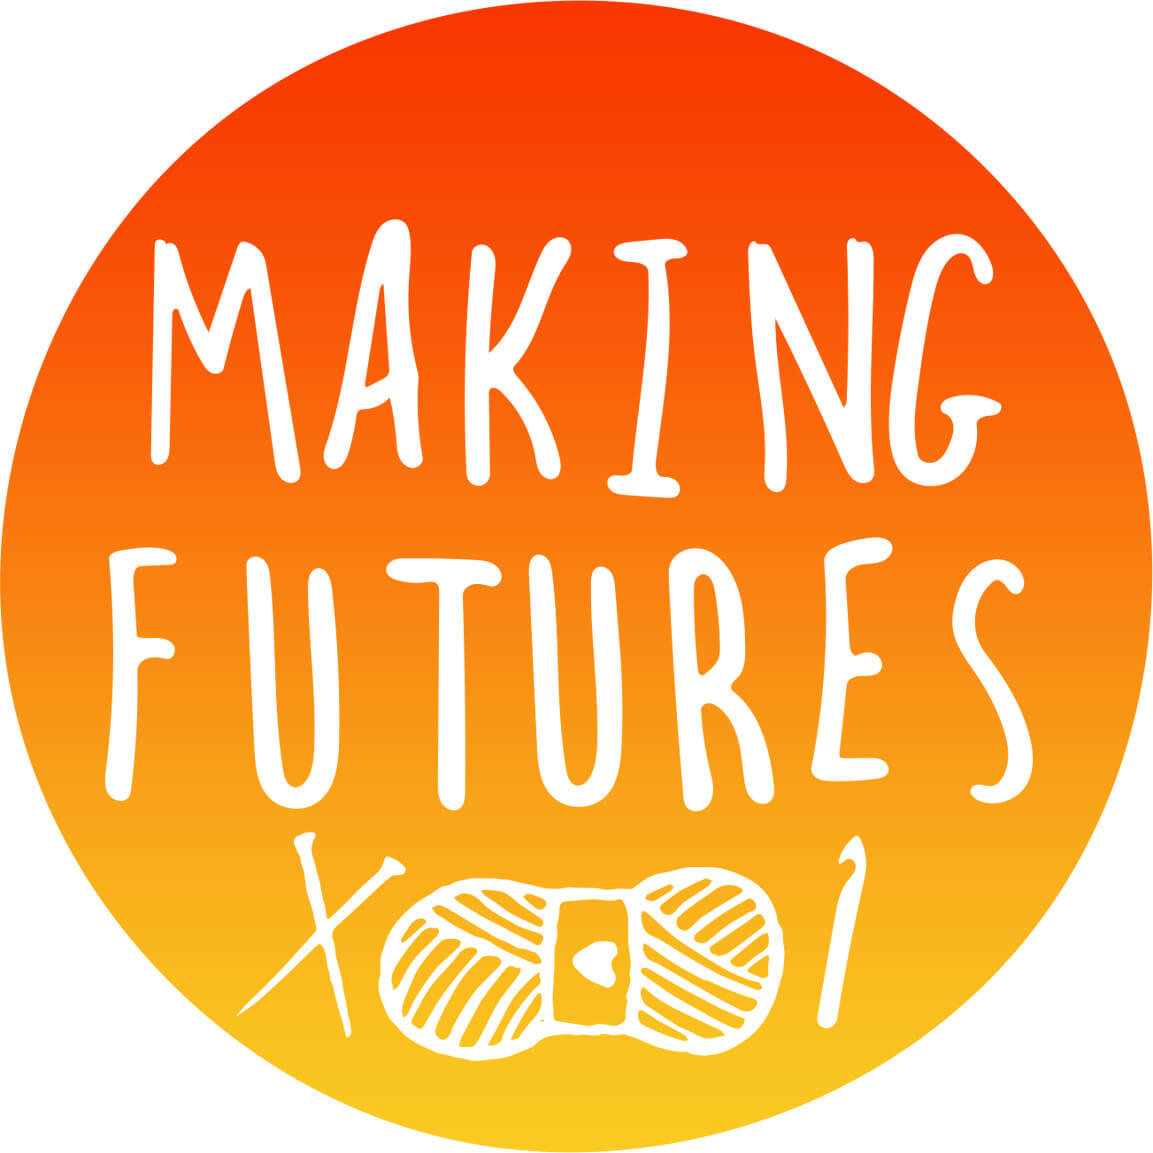 making futures cic - introductory creative skills knitting programme